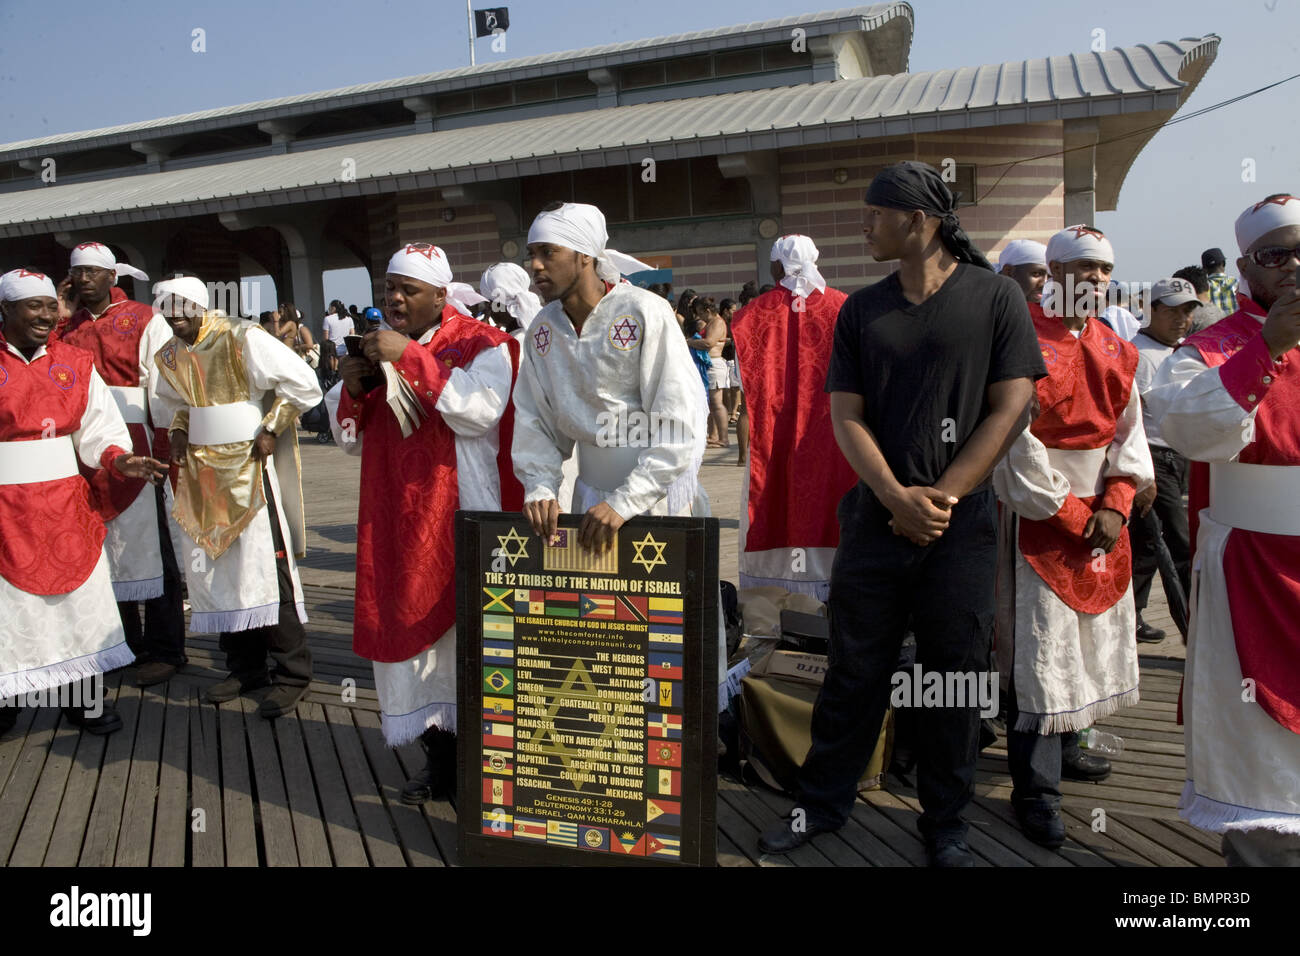 Members of the Israelite Church of God in Jesus Christ preach their Afrocentric   ideology  on the boardwalk at Coney Island. Stock Photo